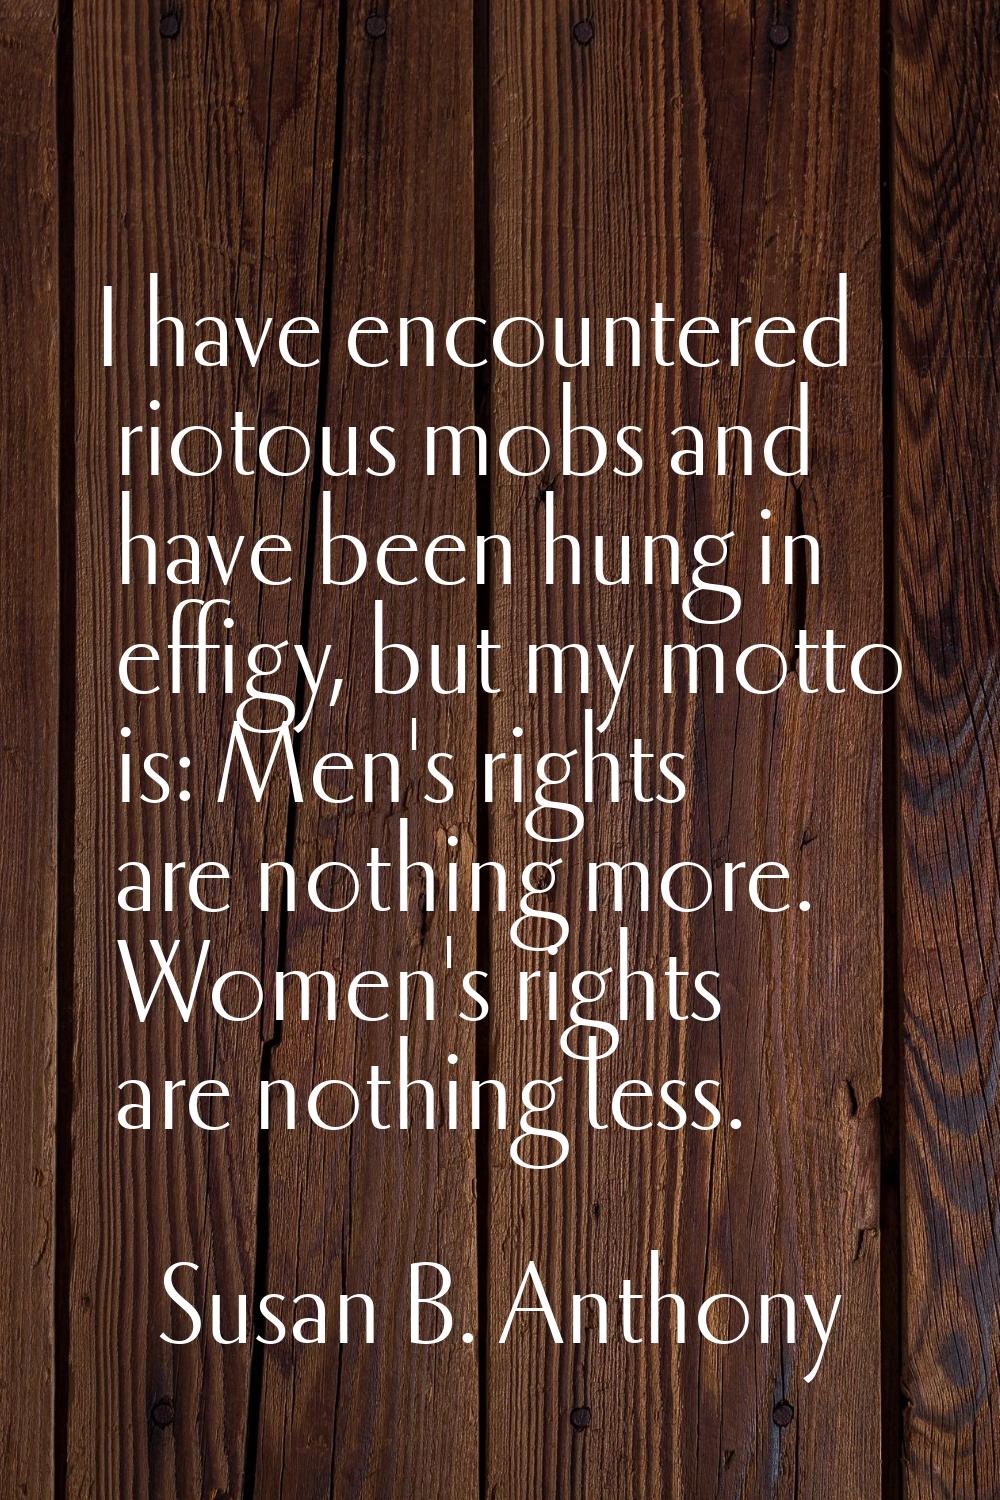 I have encountered riotous mobs and have been hung in effigy, but my motto is: Men's rights are not